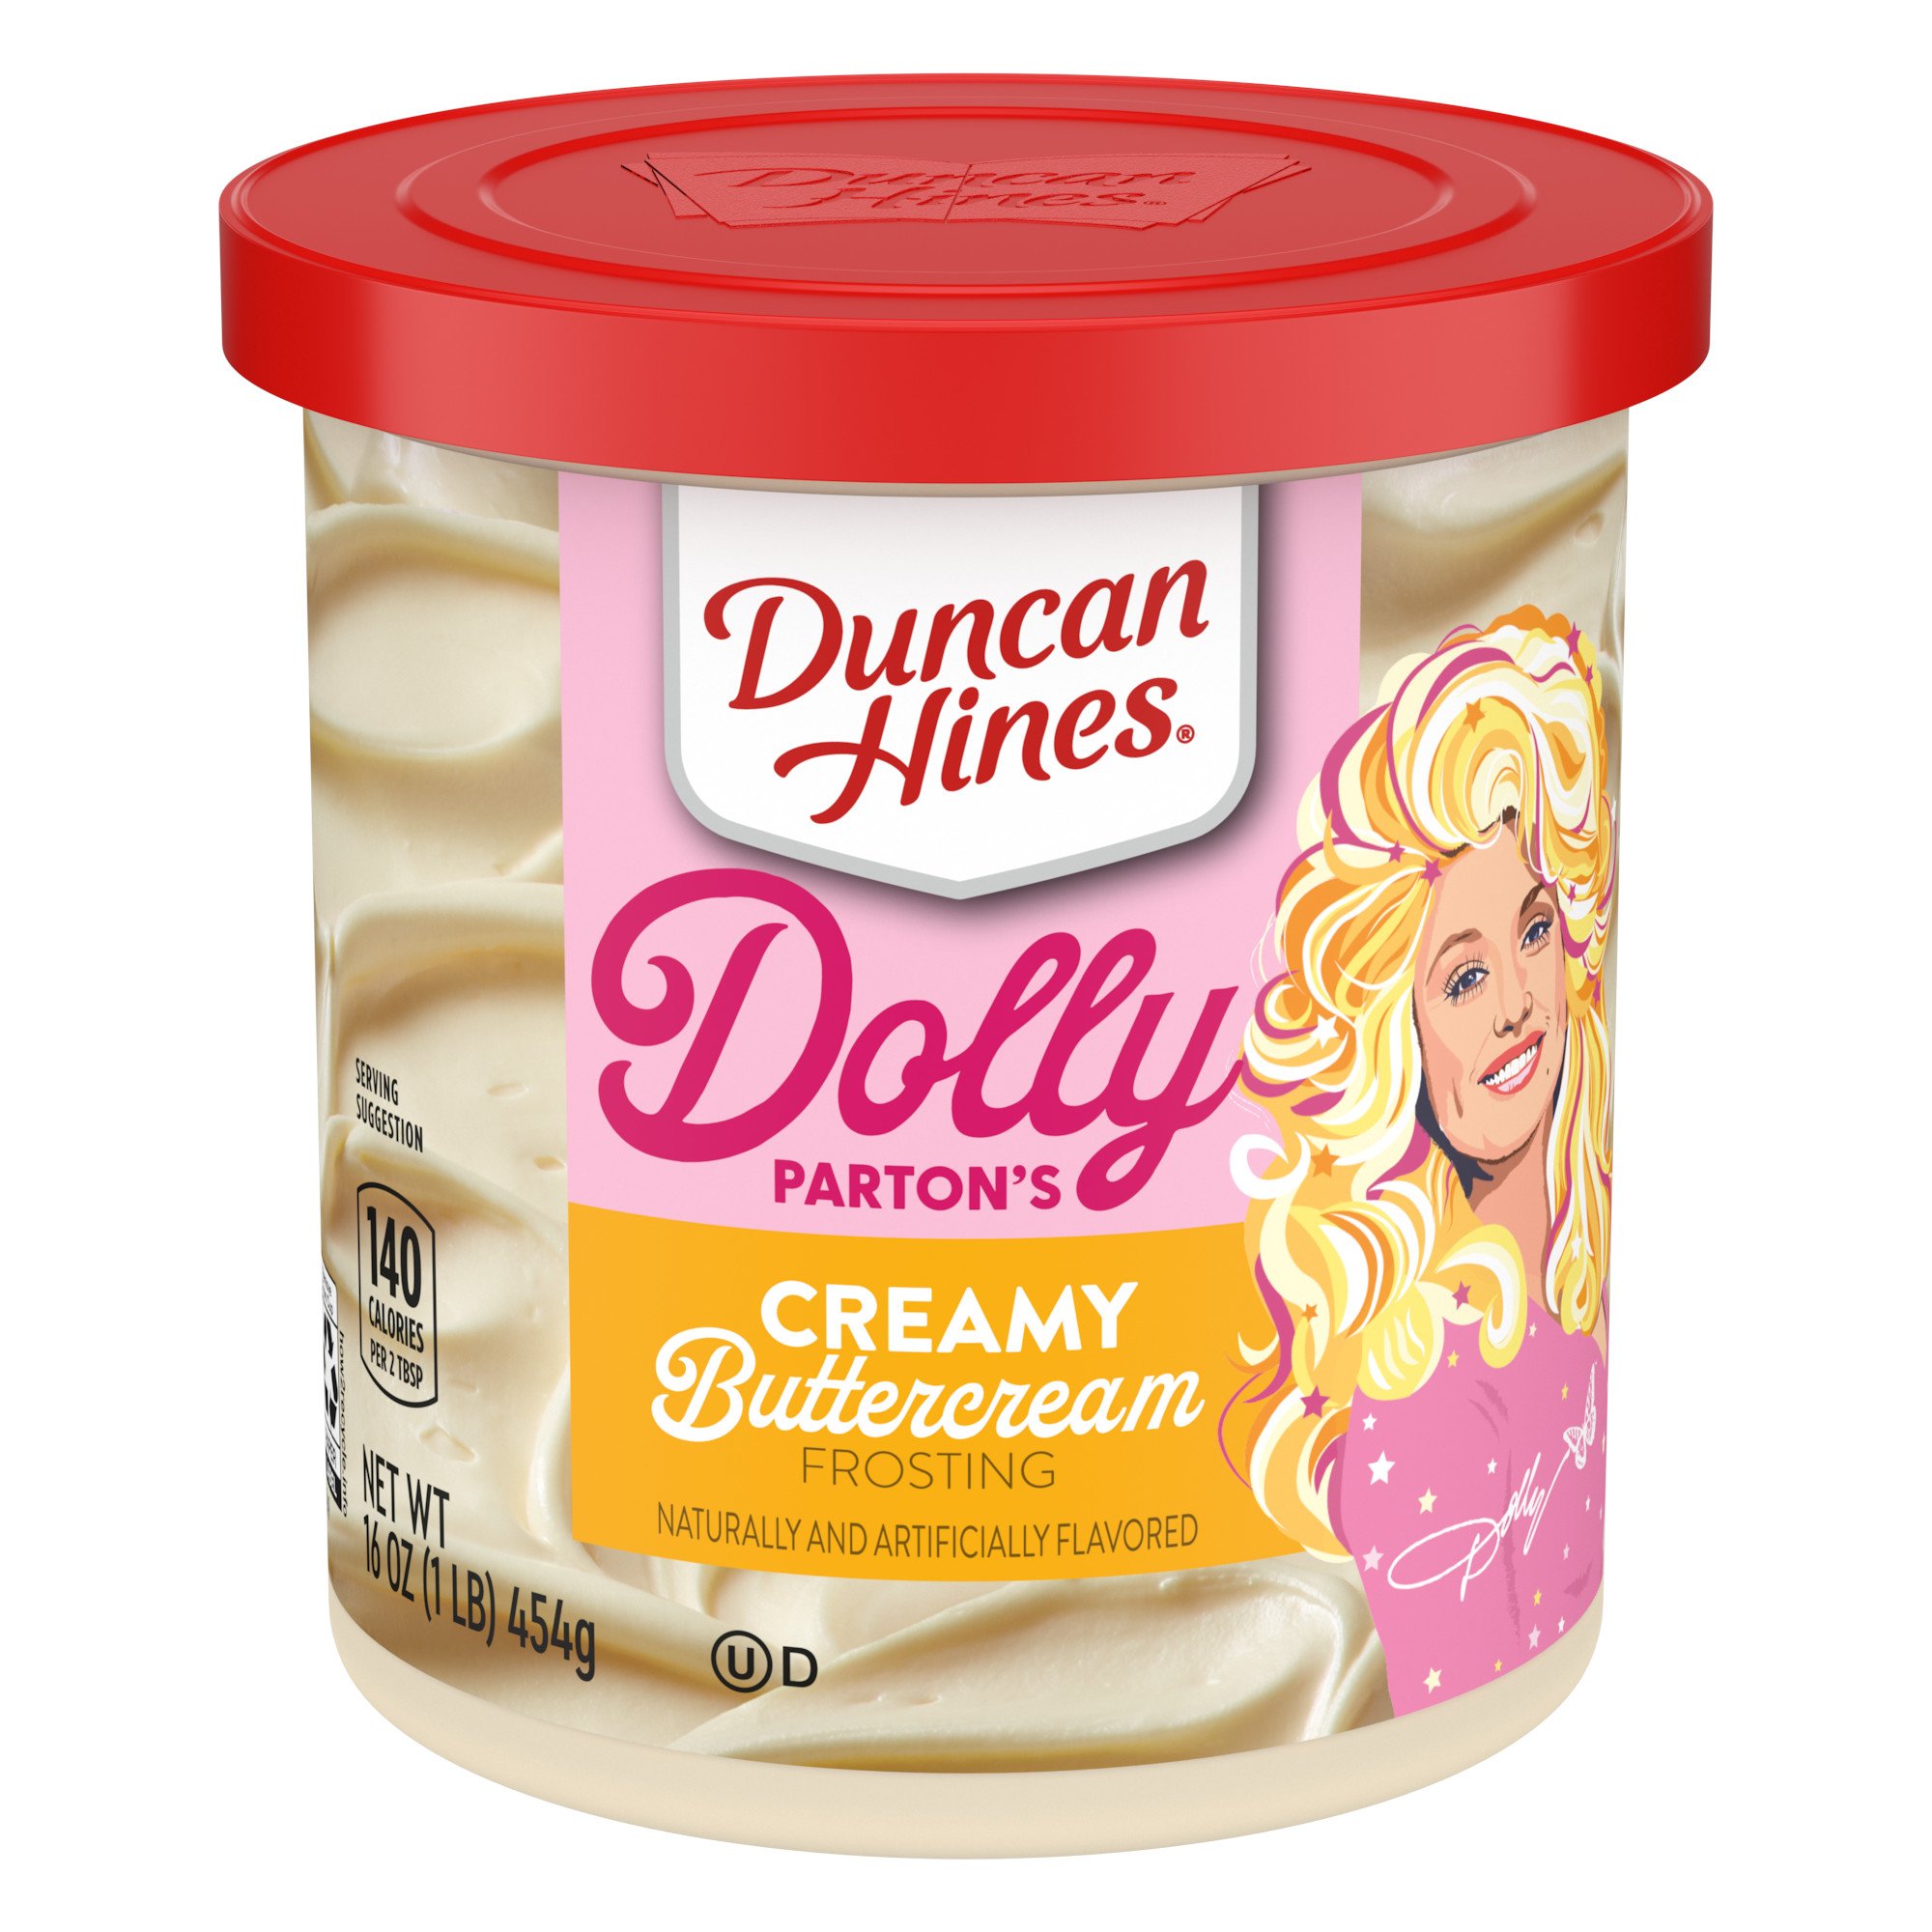 Machu Picchu jurist Port Duncan Hines Dolly Parton's Creamy Buttercream Frosting - Shop Baking  Ingredients at H-E-B